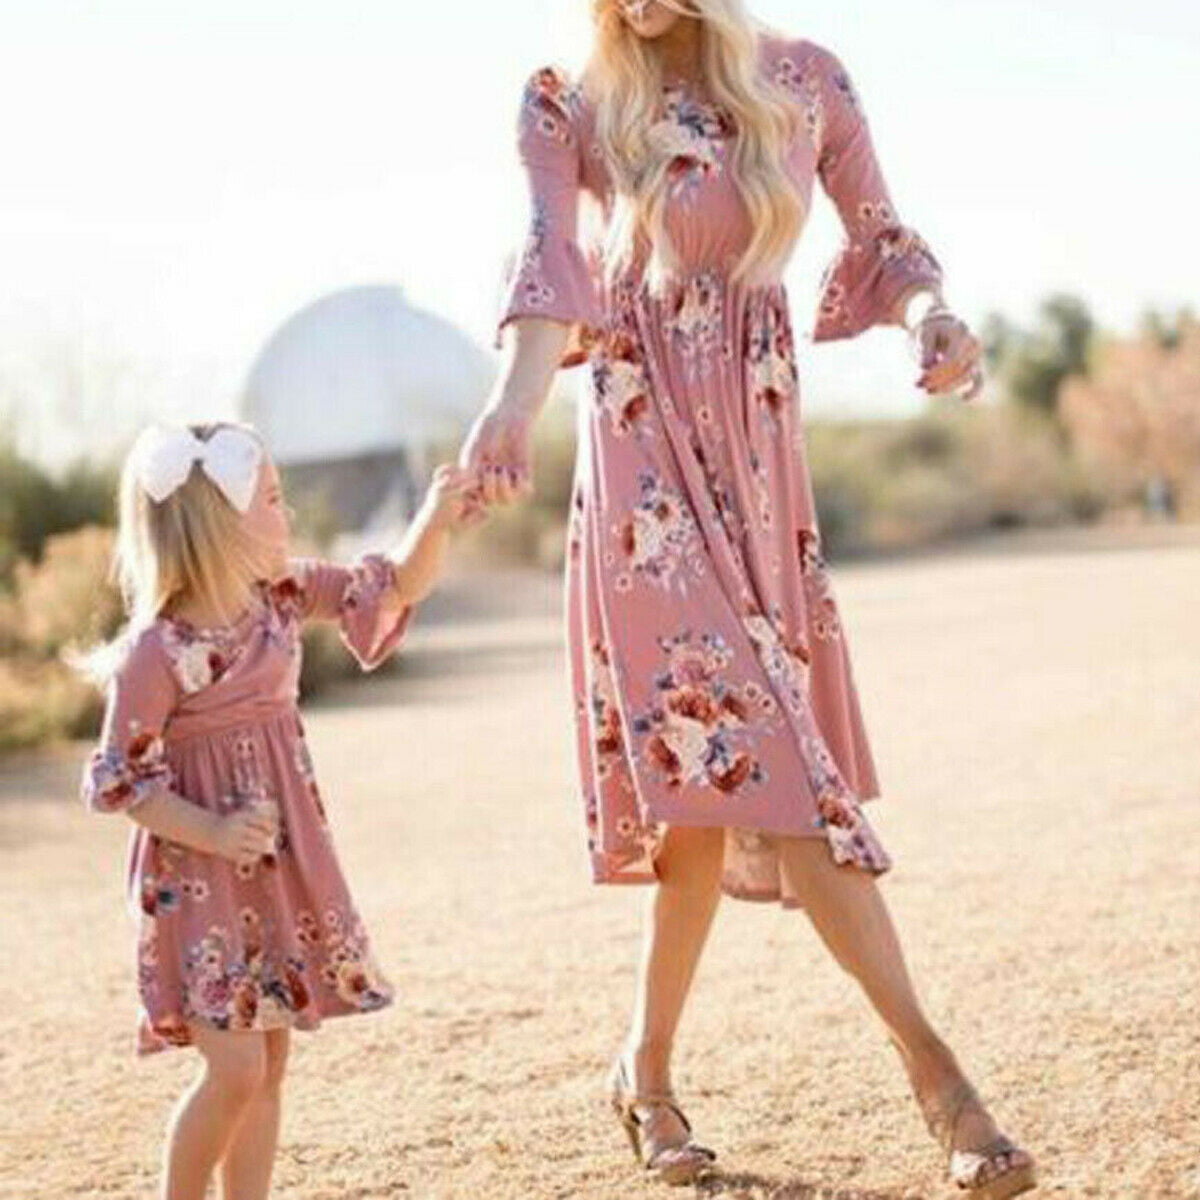 Mommy and Me Family Matching Dress Mother Daughter Floral Boho Dresses Short New